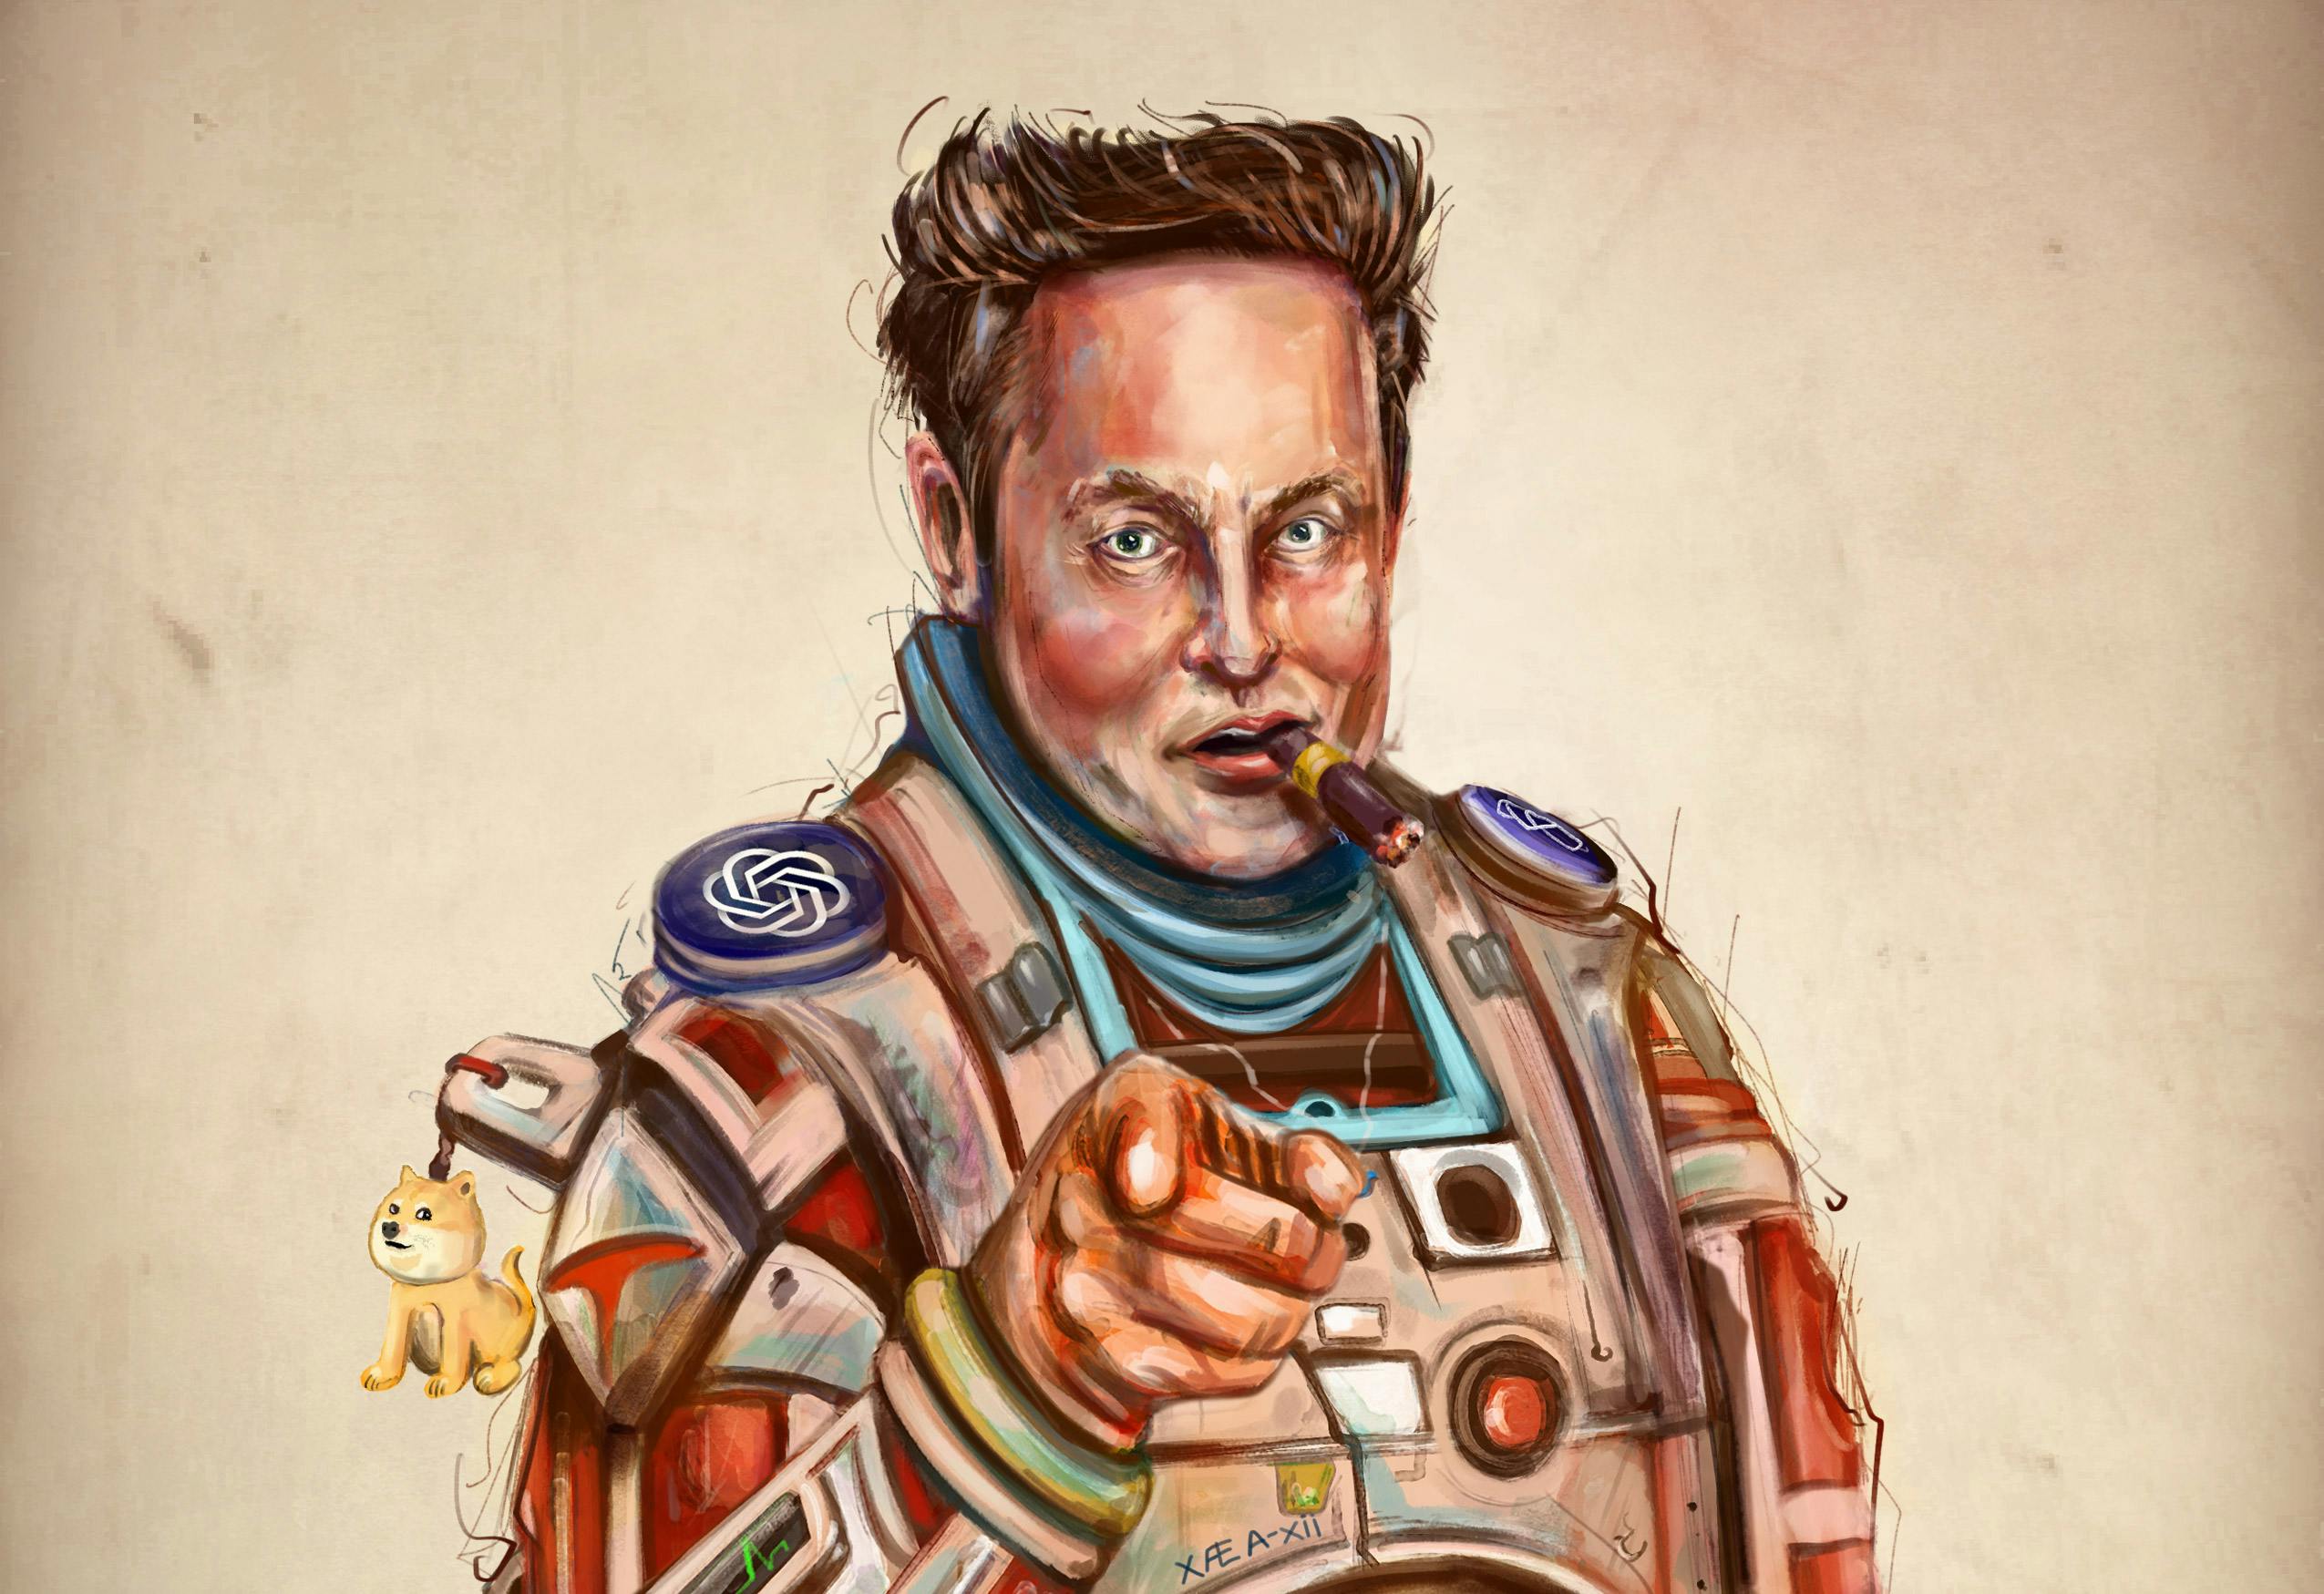 Elon Musk and Twitter: Why it Matters